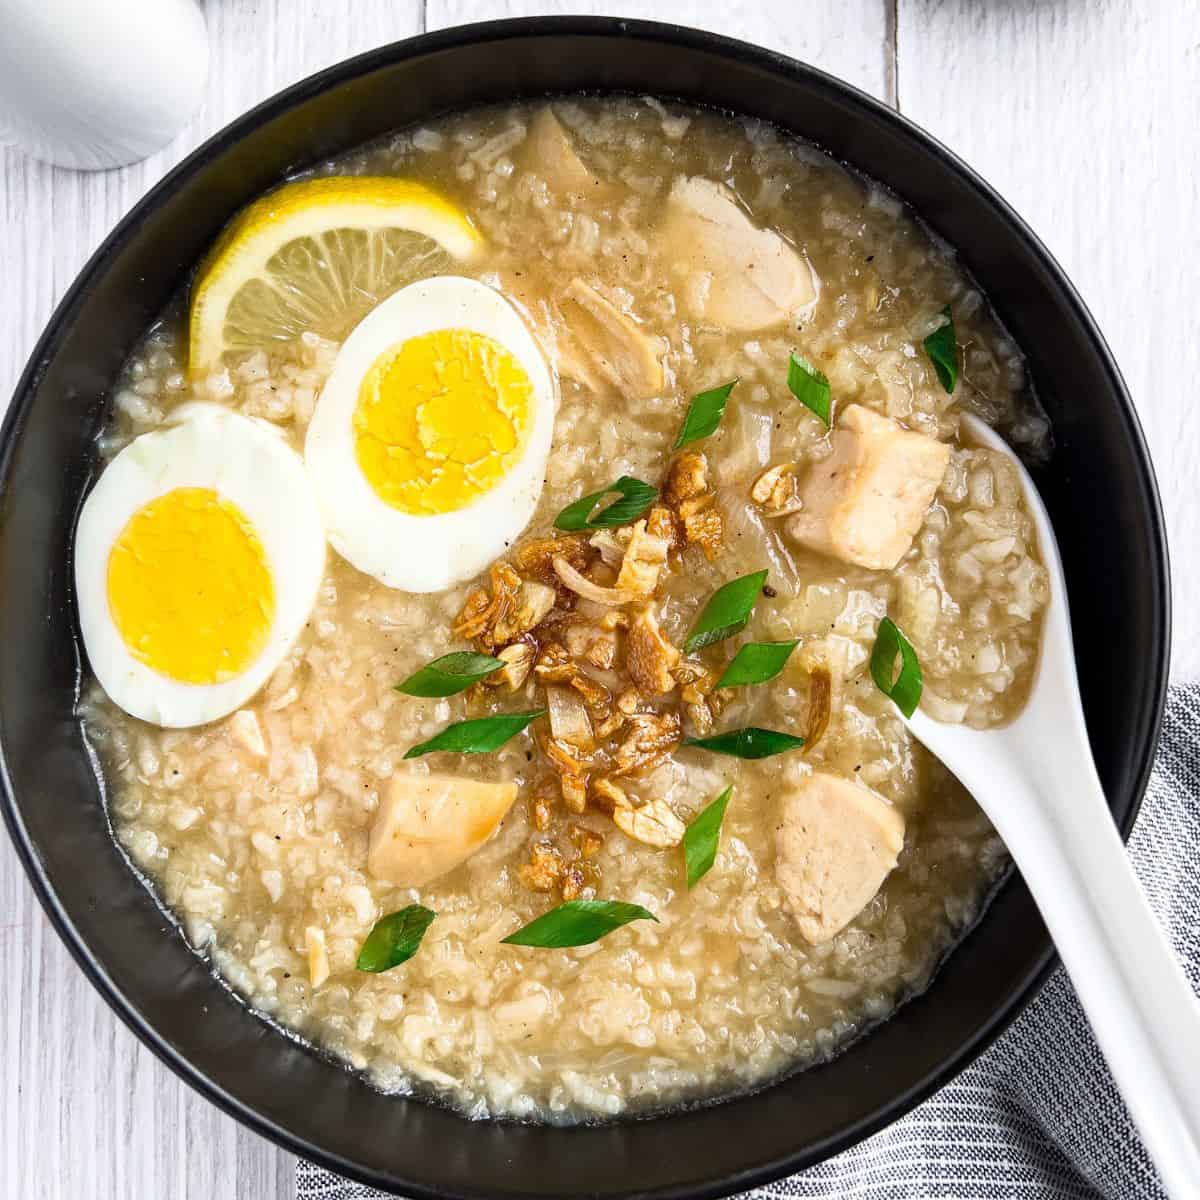 Arroz caldo in a bowl with slices of egg, lemon, chopped green onion and toased garlic.